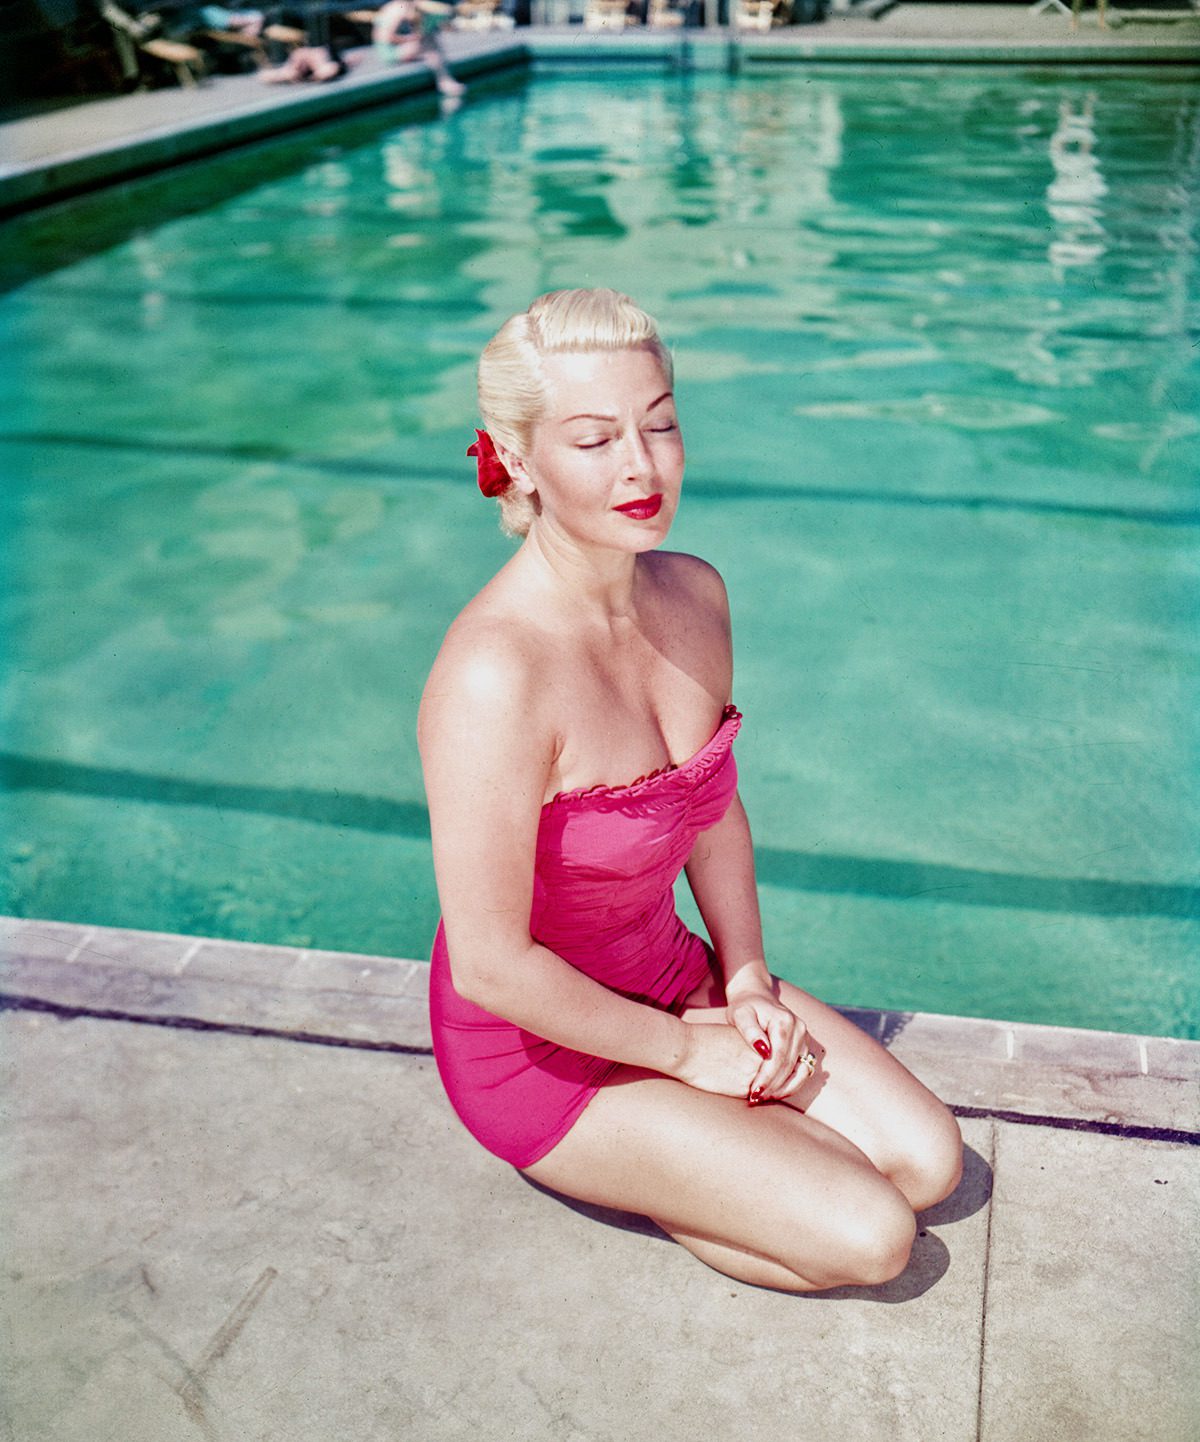 Lana Turner by pool at the Coral Casino